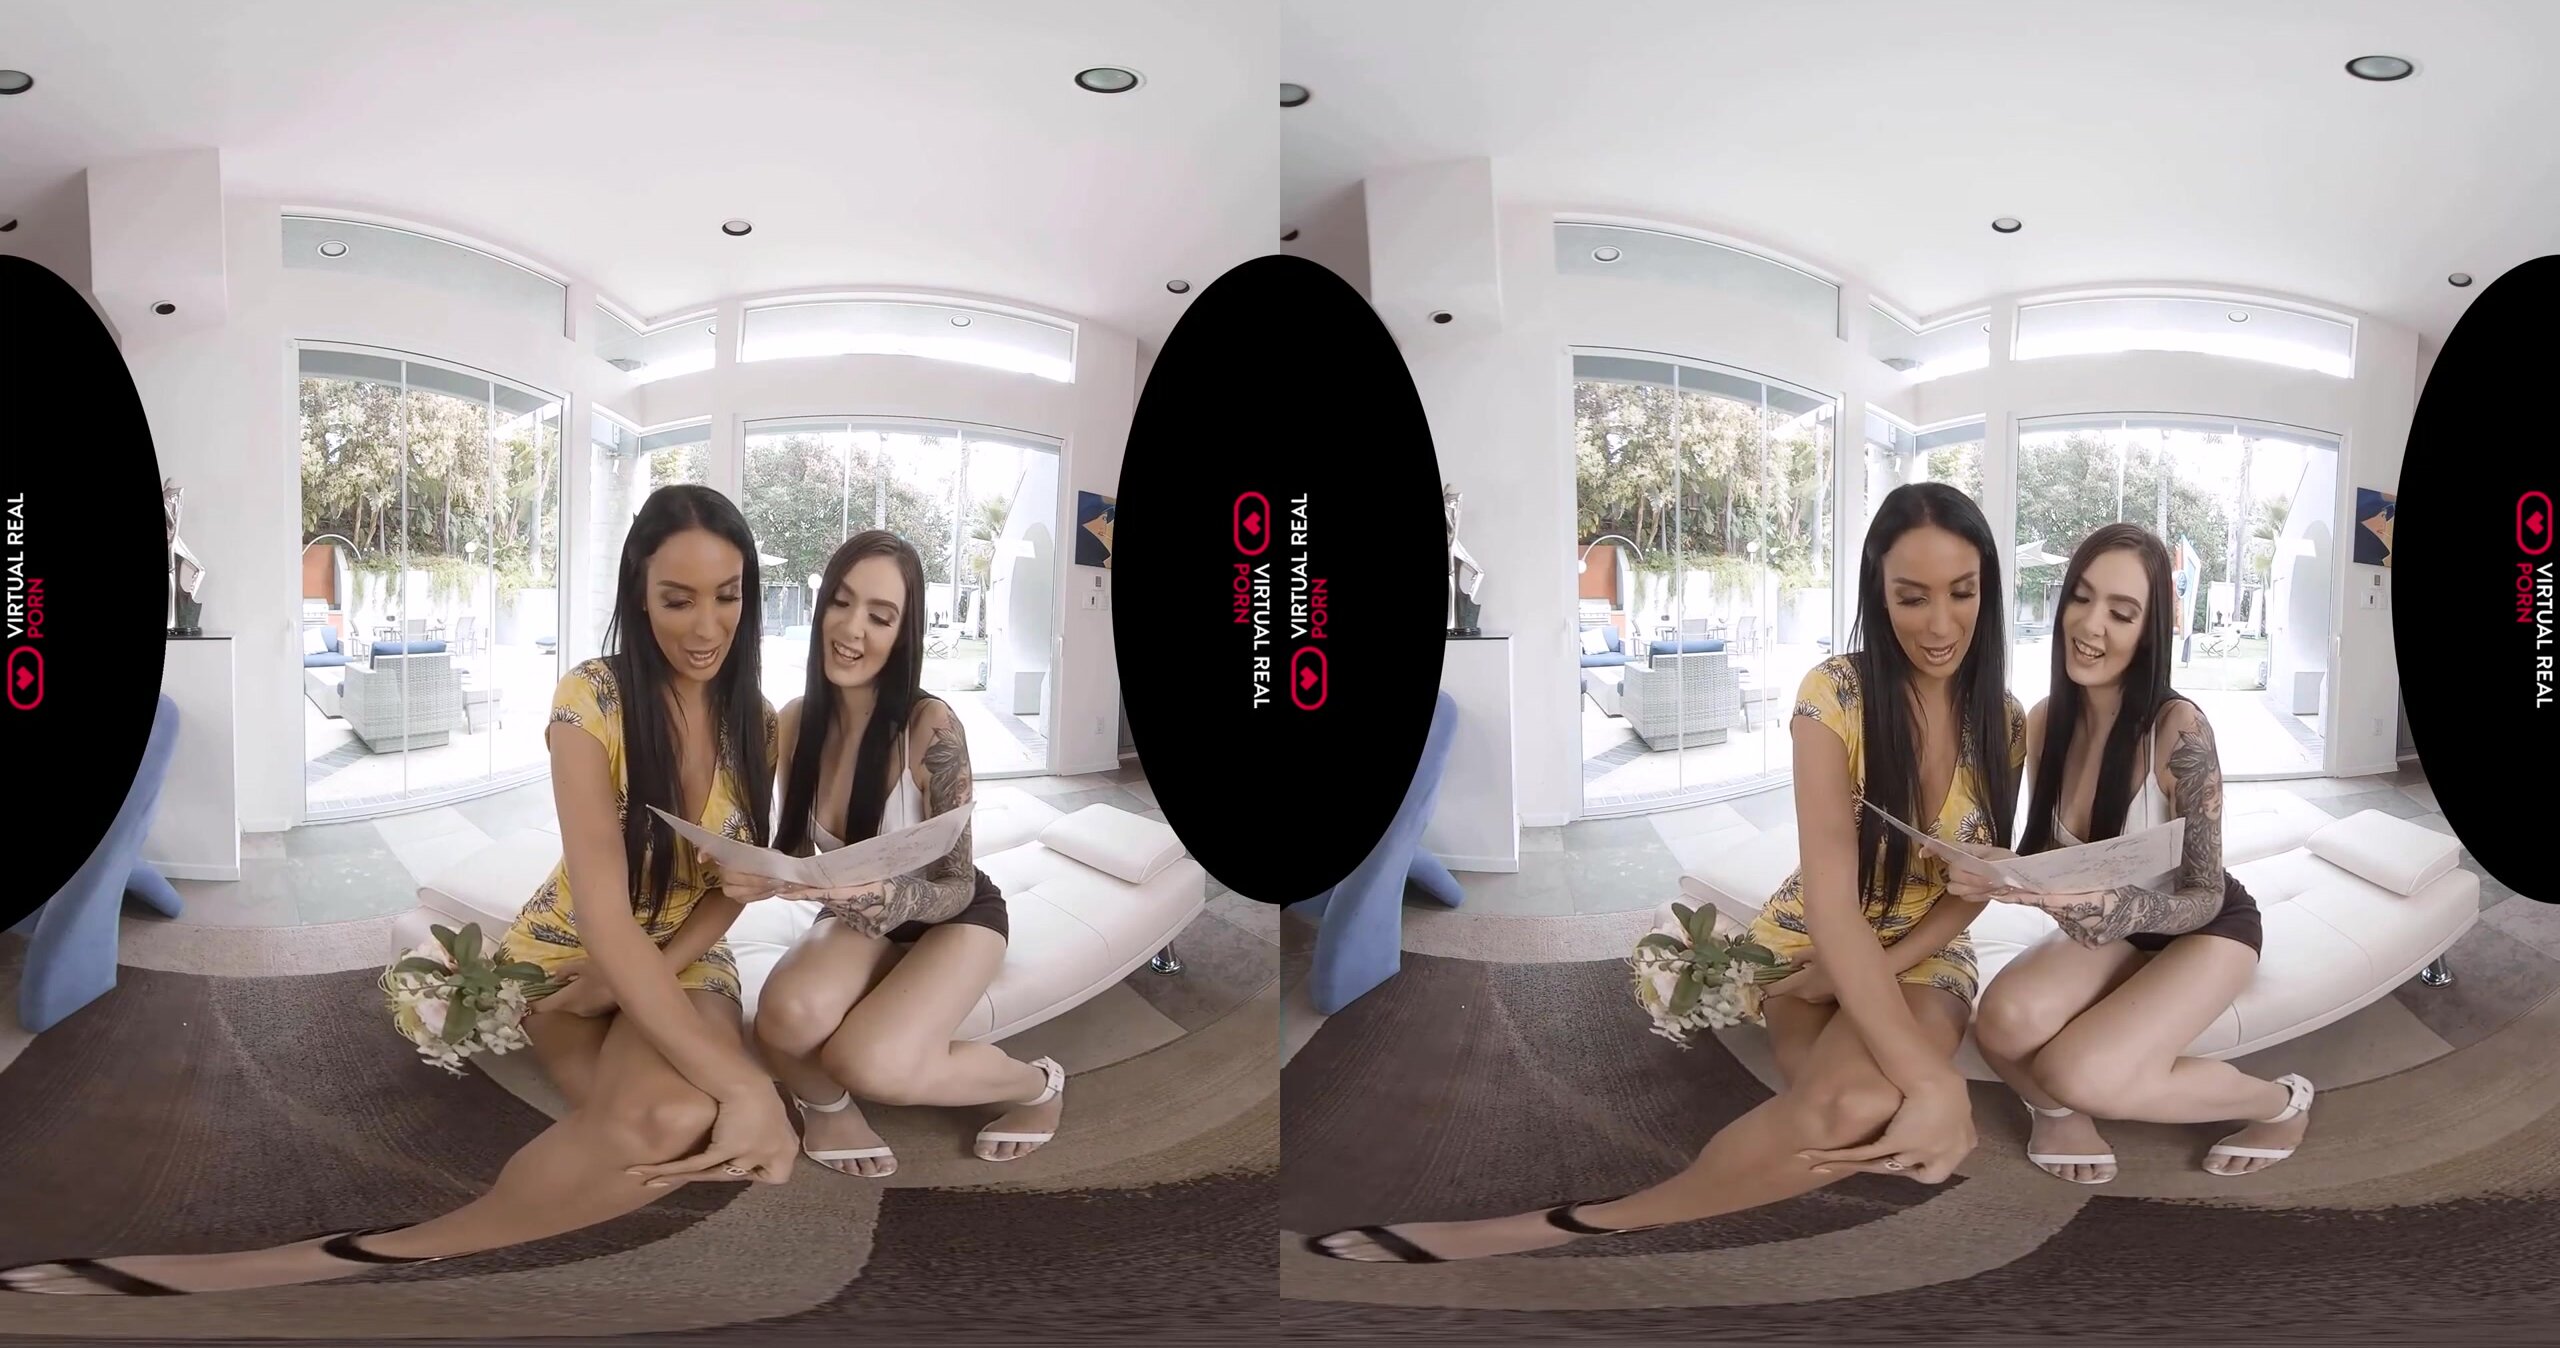 Marley Brinx, Anissa Kate - Relax for mommy